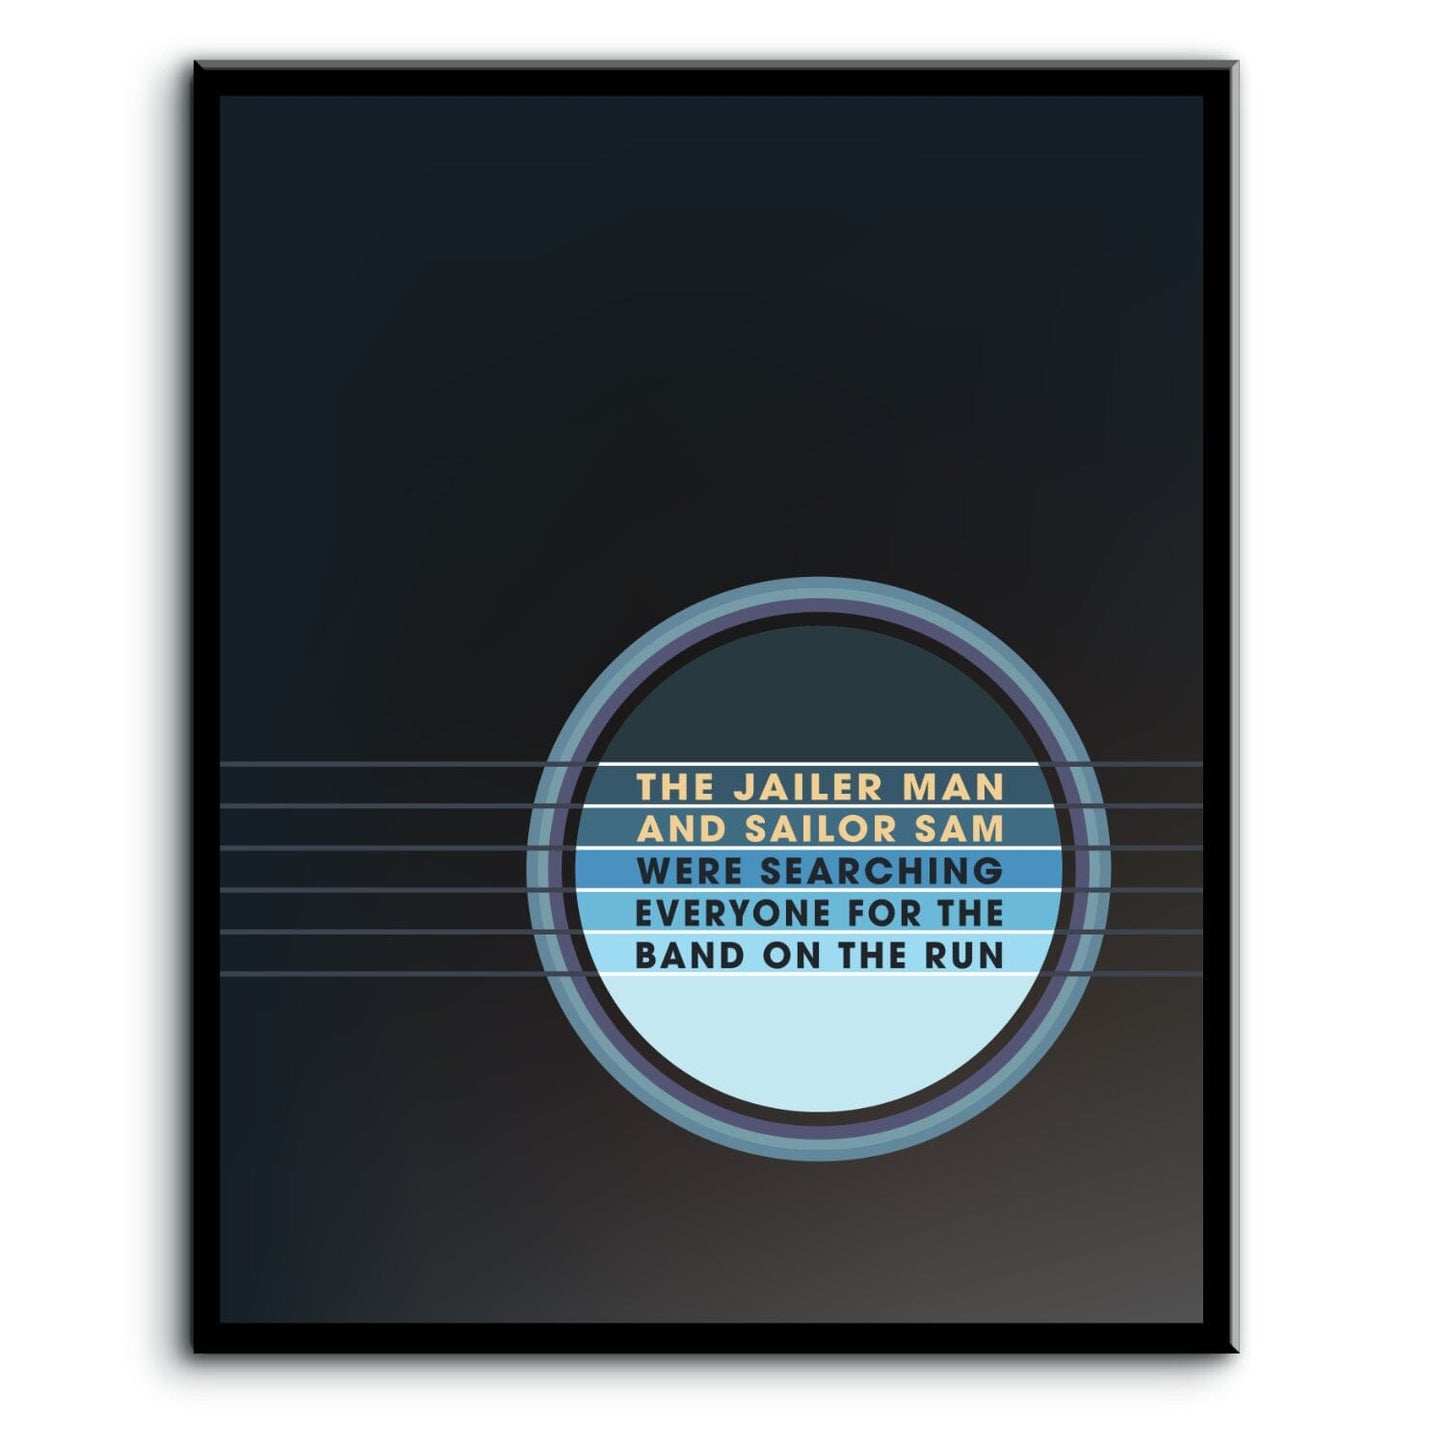 Band on the Run by Paul McCartney - Rock Song Lyric Art Song Lyrics Art Song Lyrics Art 8x10 Plaque Mount 